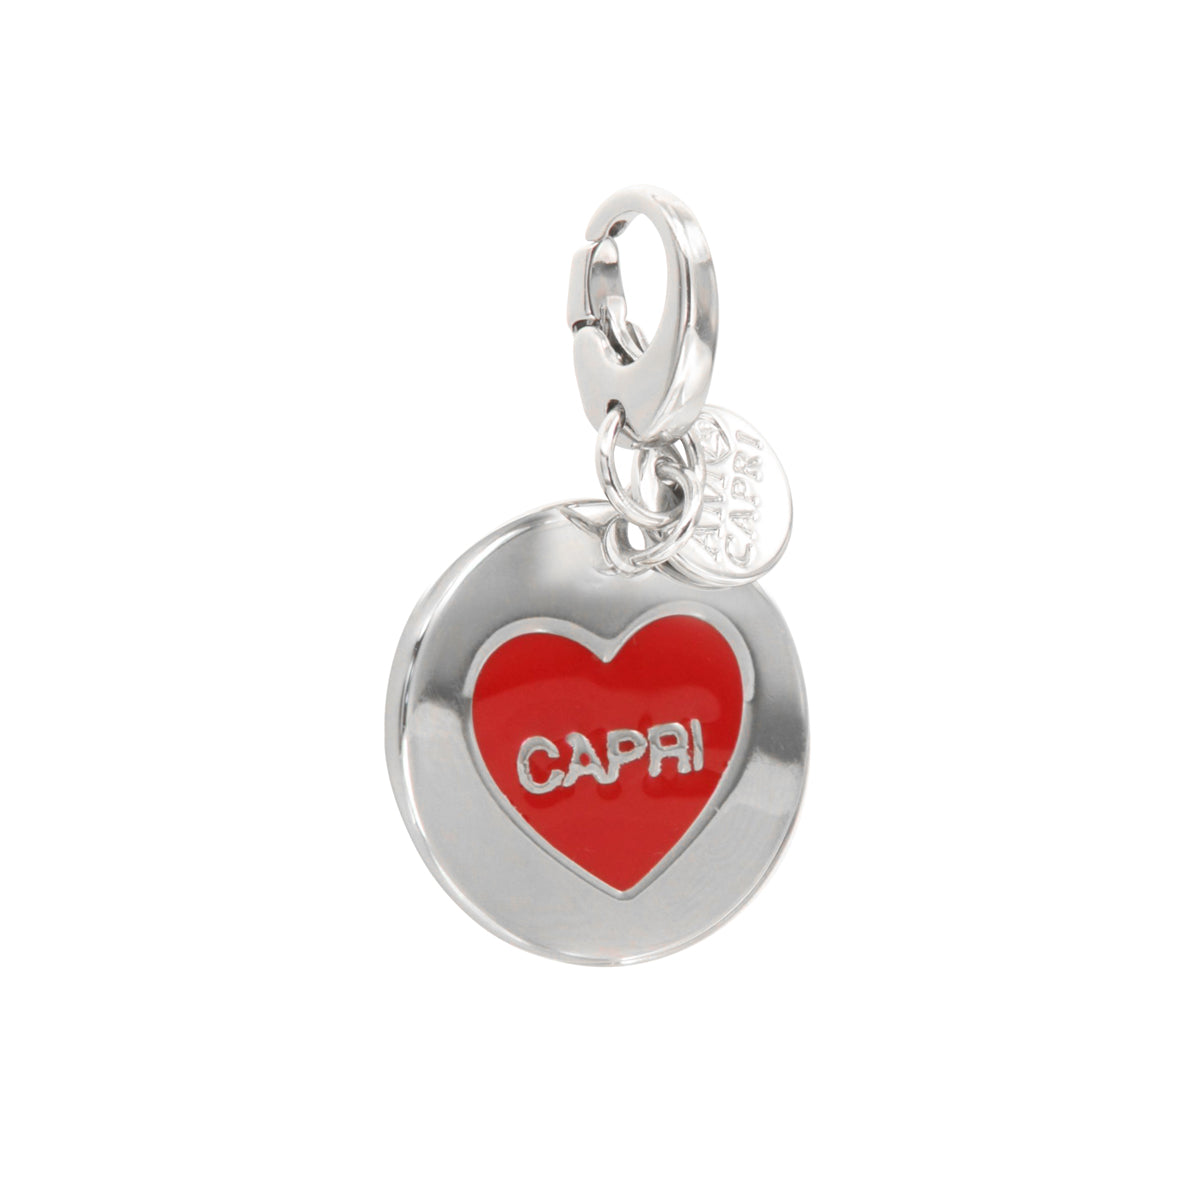 Metal pendant in medallion with Capri symbol in the heart, embellished with red enamel